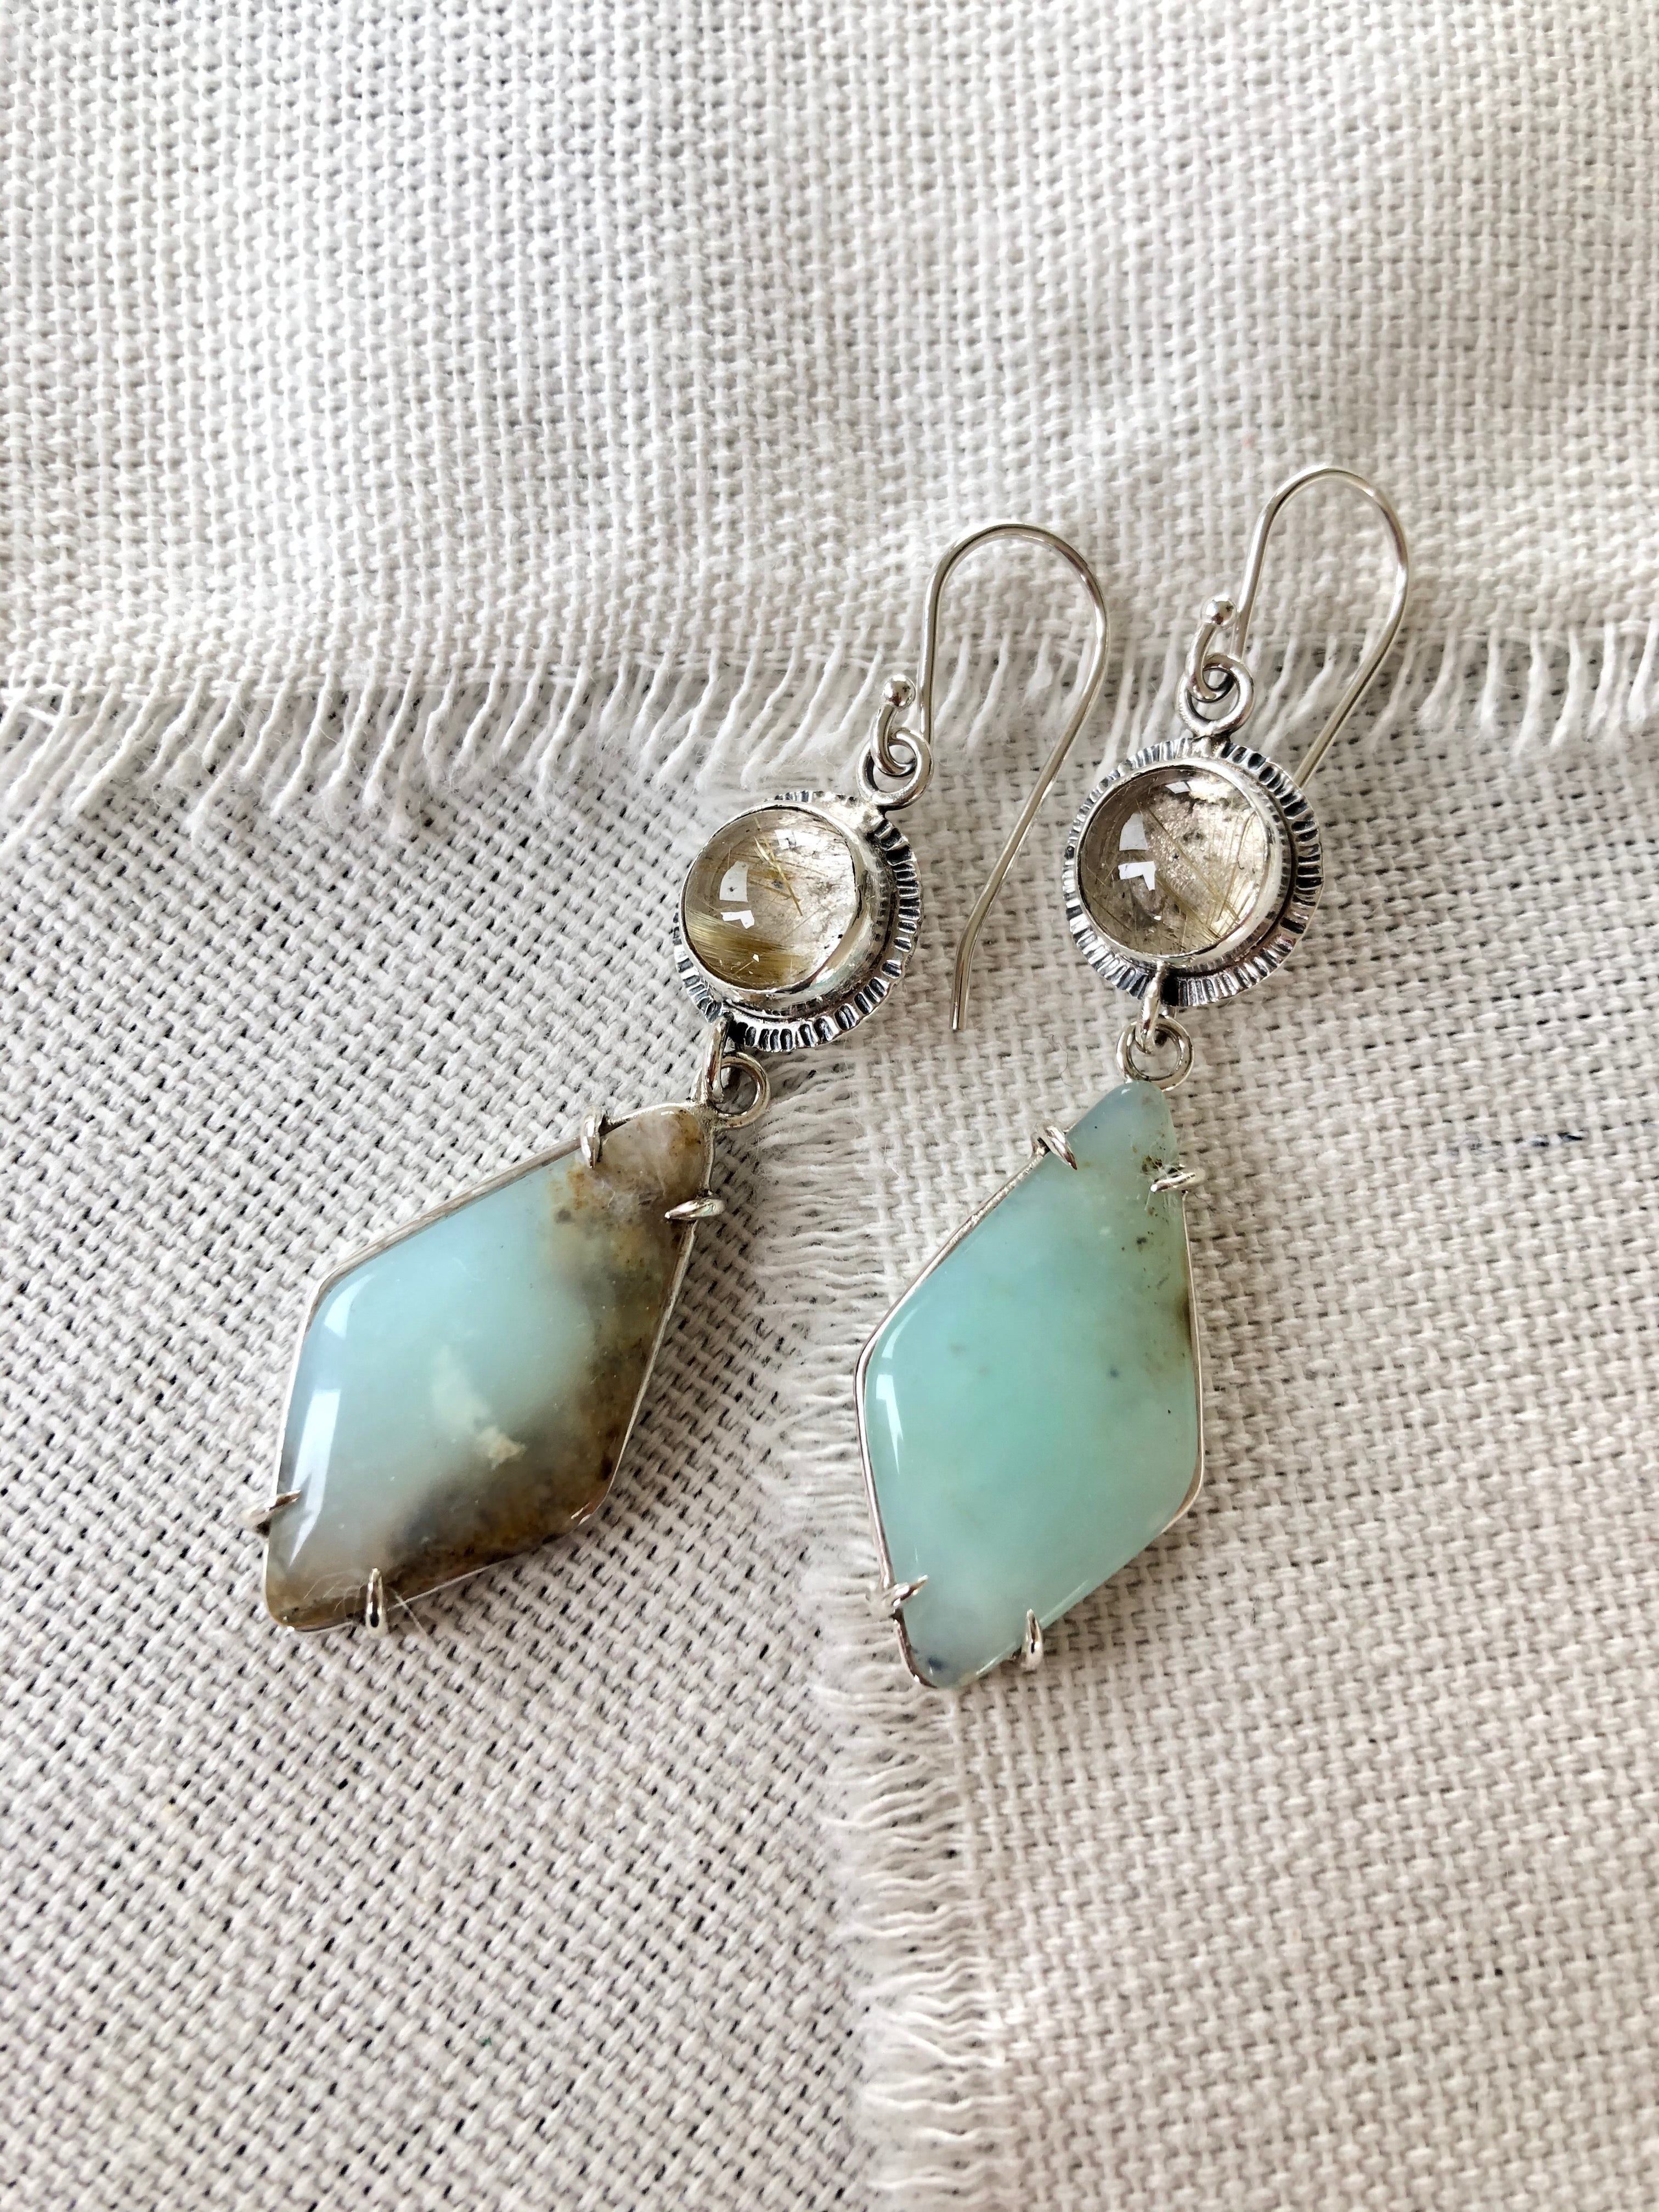 These one of a kind Peruvian blue opal earrings will bring joy and light to any outfit.  These Peruvian Blue Opal earrings are prong set in sterling silver and paired with rutilated quartz stones to continue the soft muted style. 